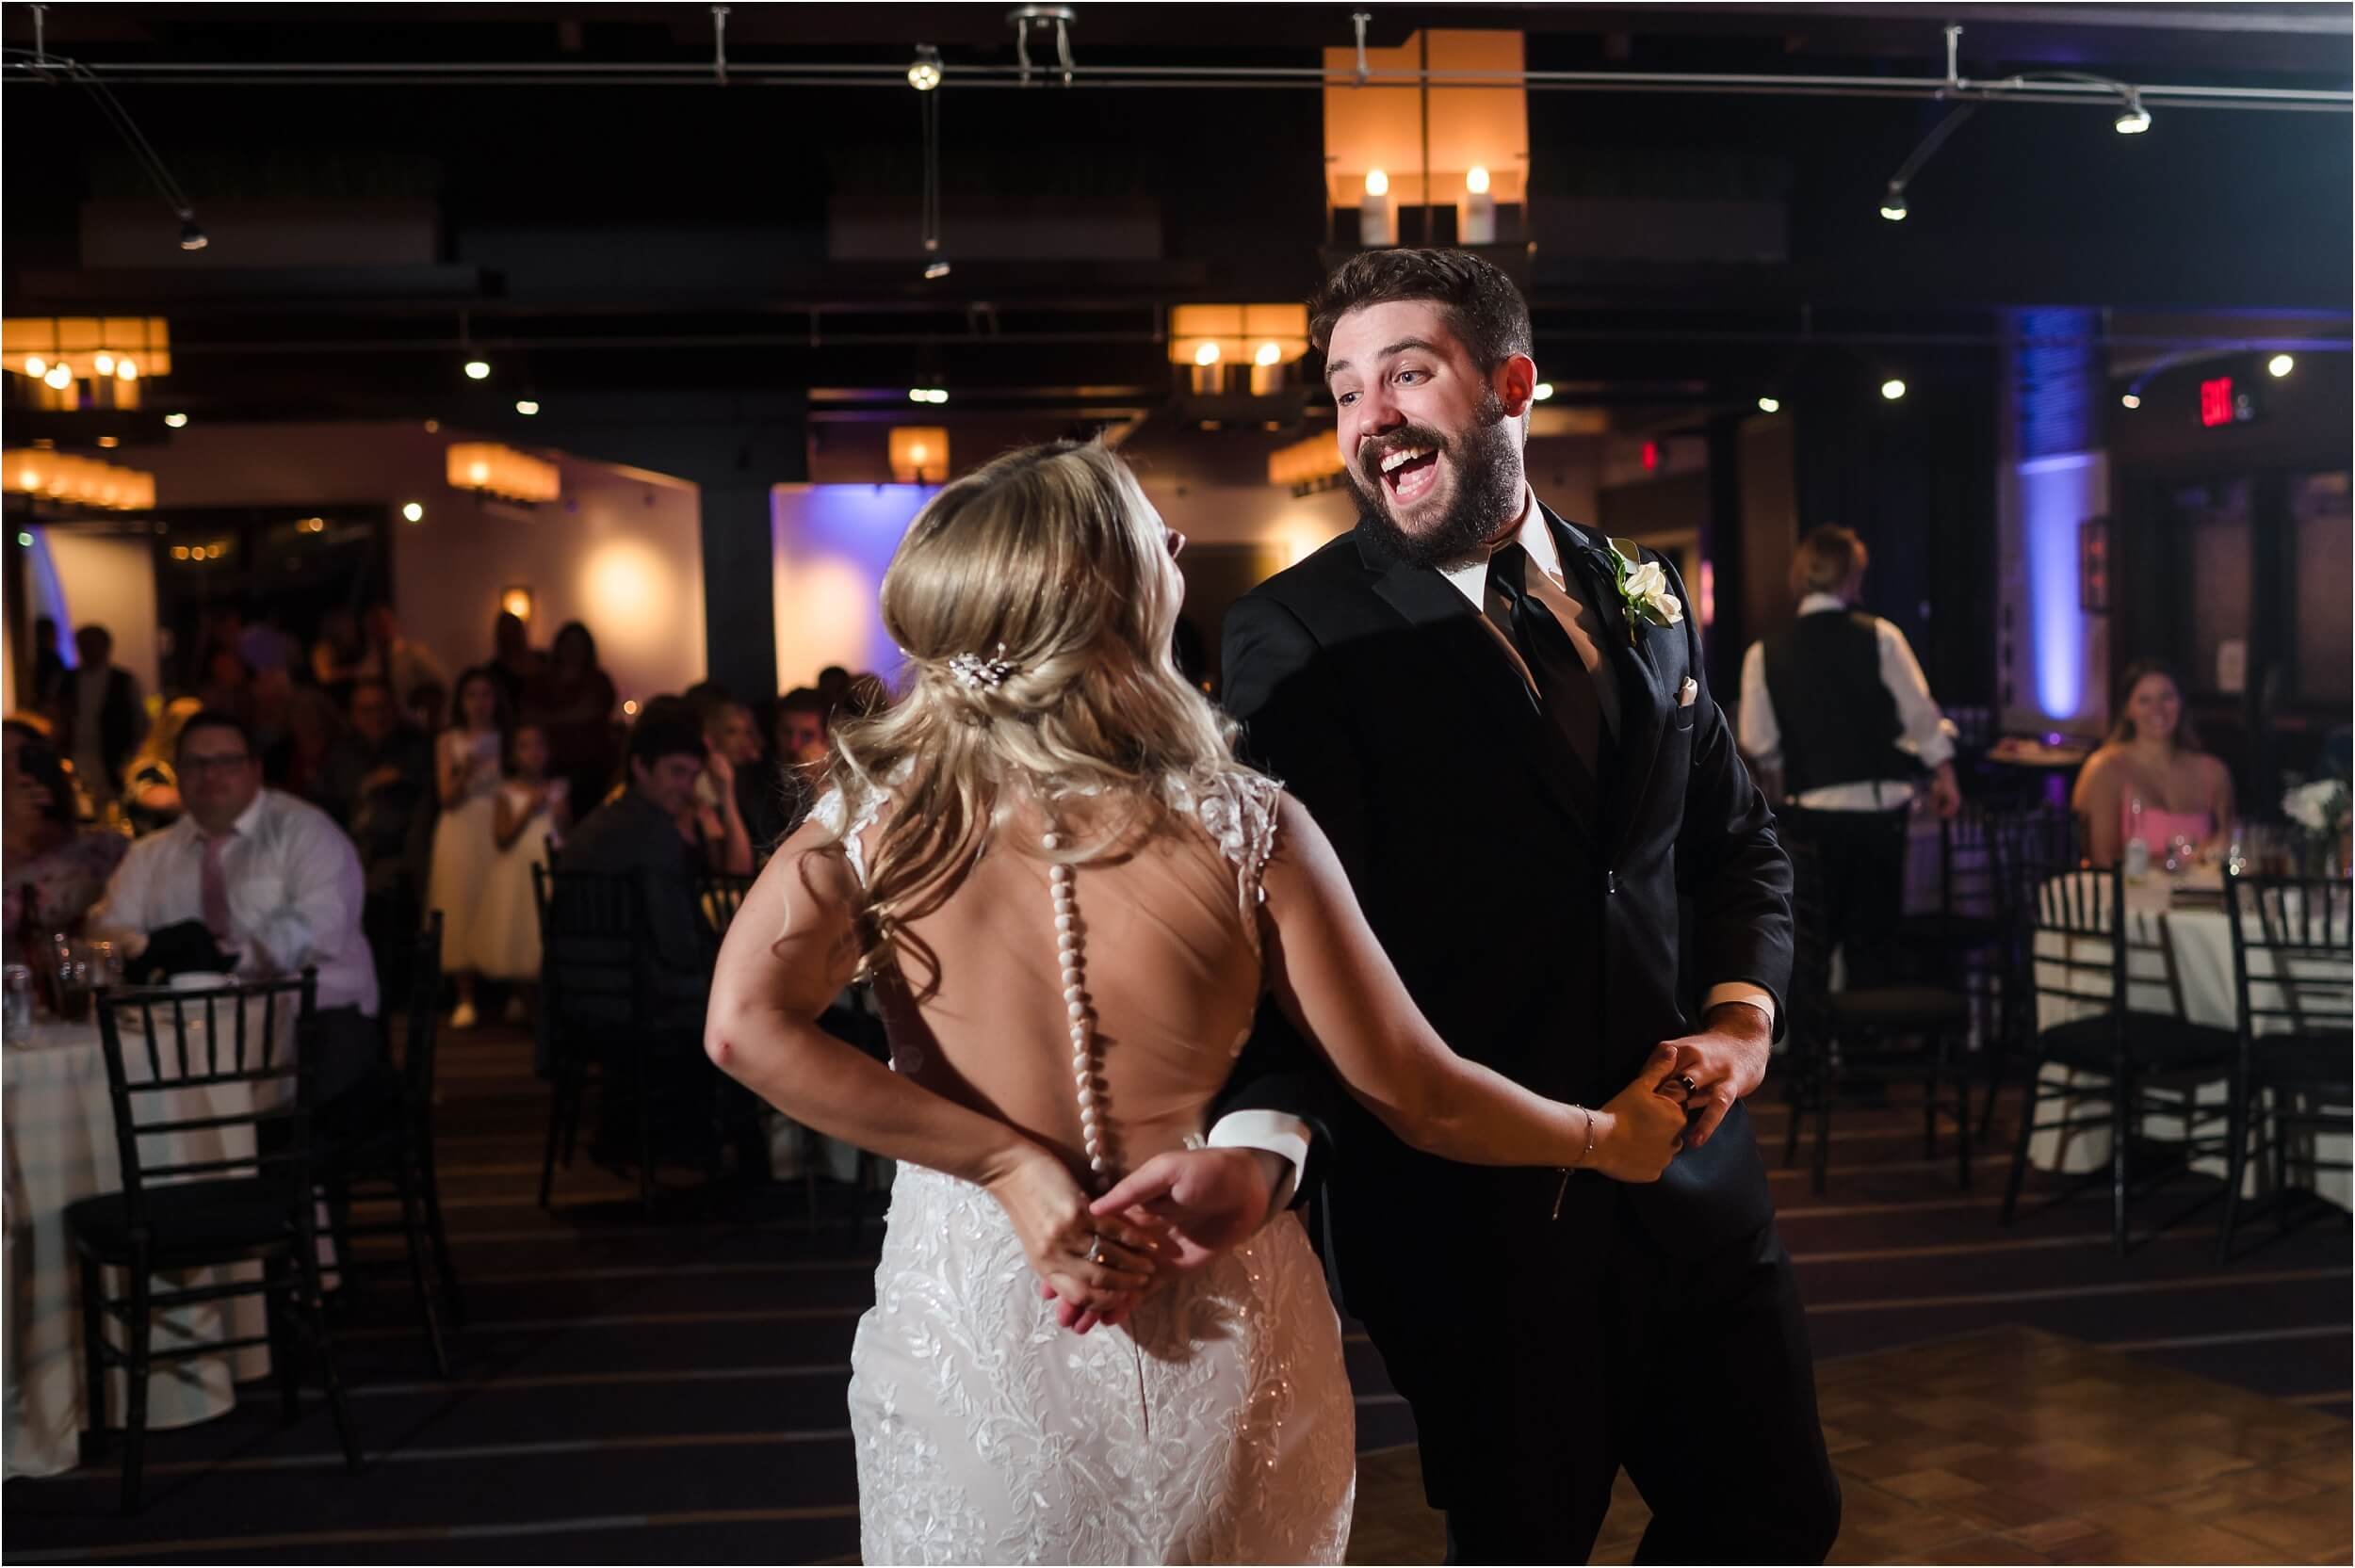  A couple spins enthusiastically during their first dance.  